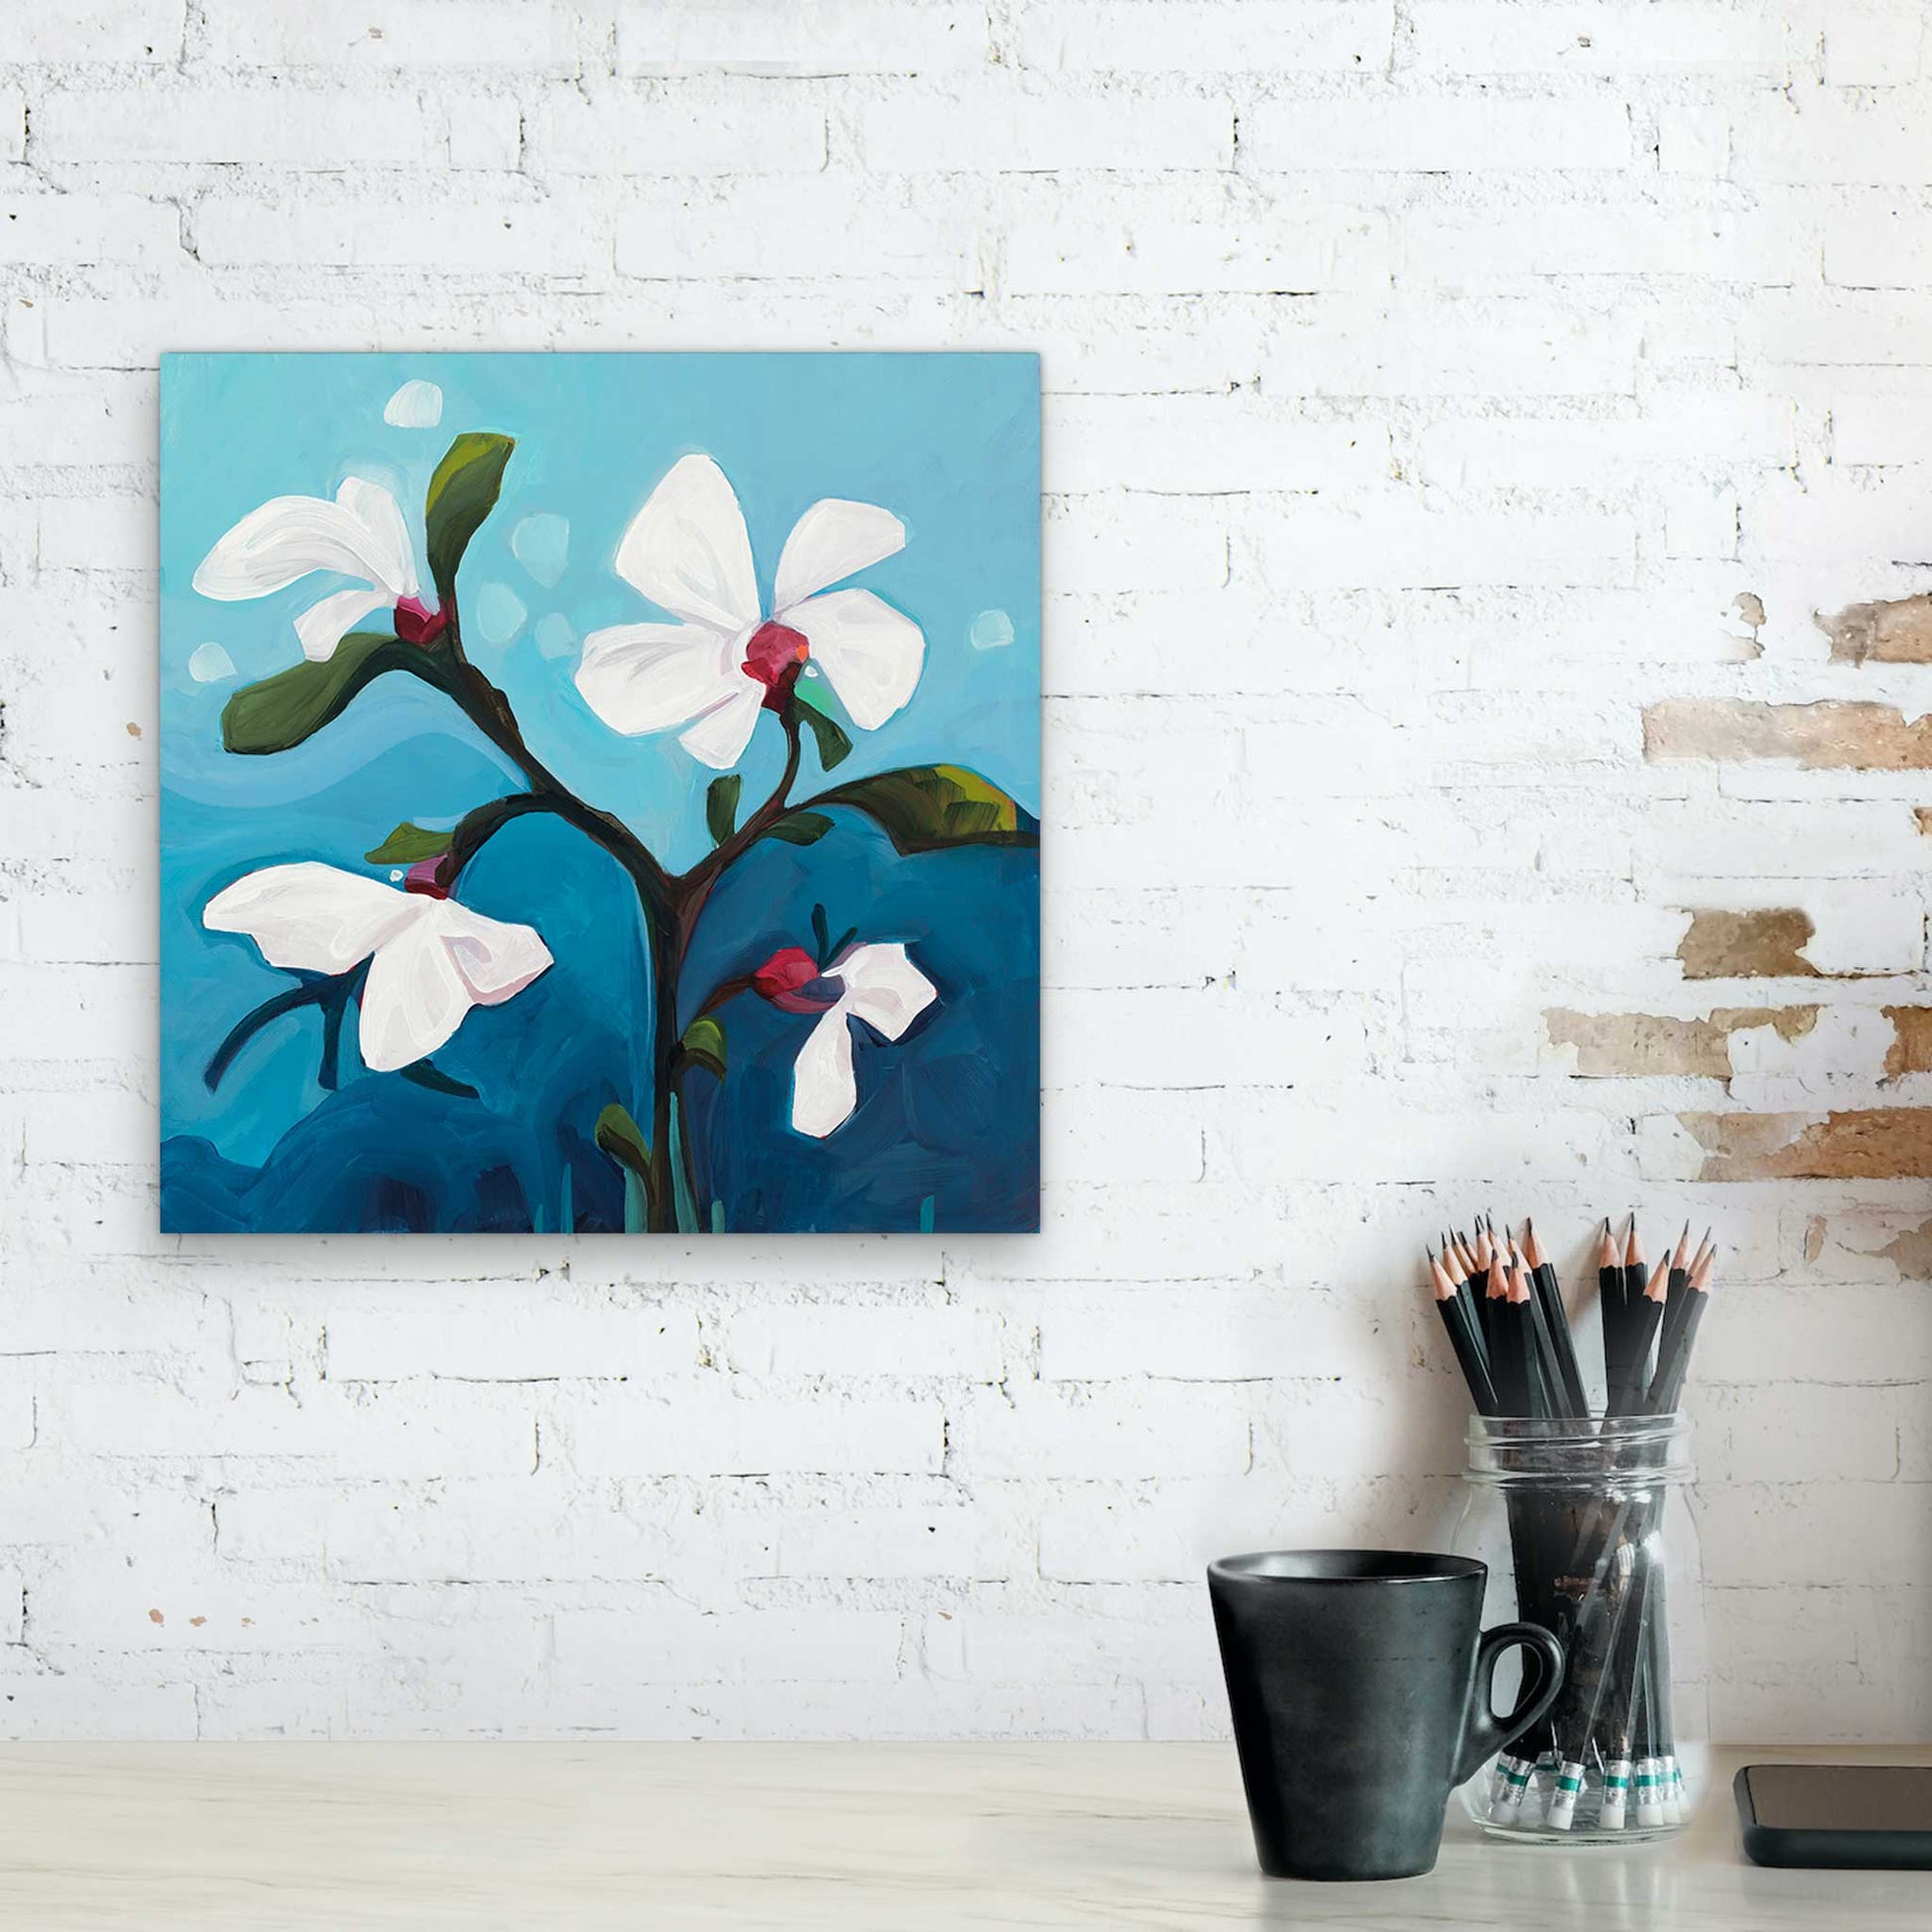 Acrylic flower painting canvas floral art image of abstract flower by Candian artist Susanah Bleasby